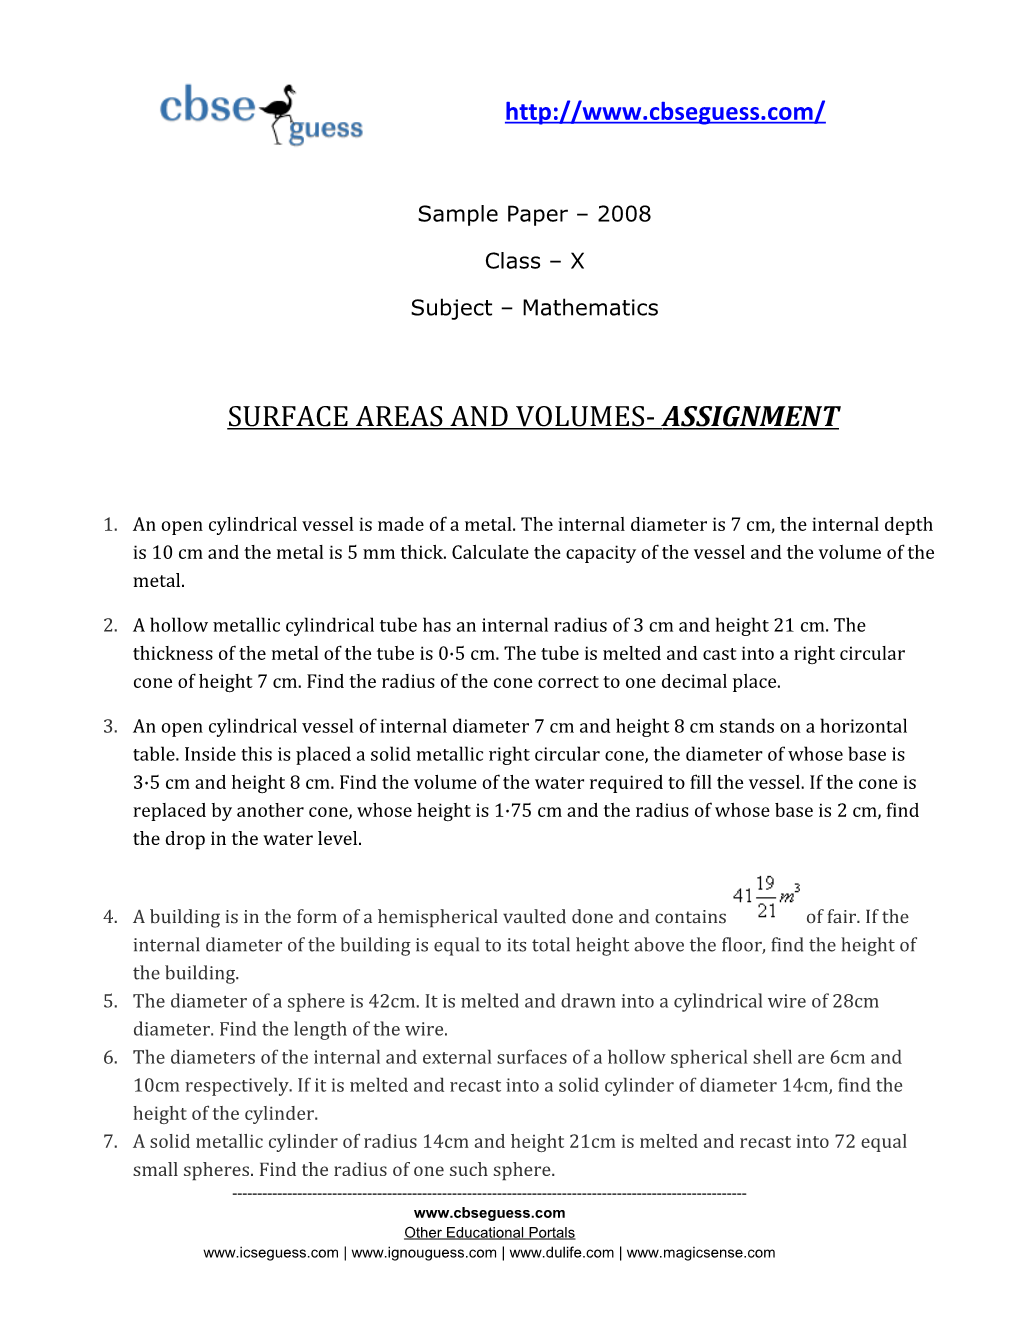 Surface Areas and Volumes- Assignment